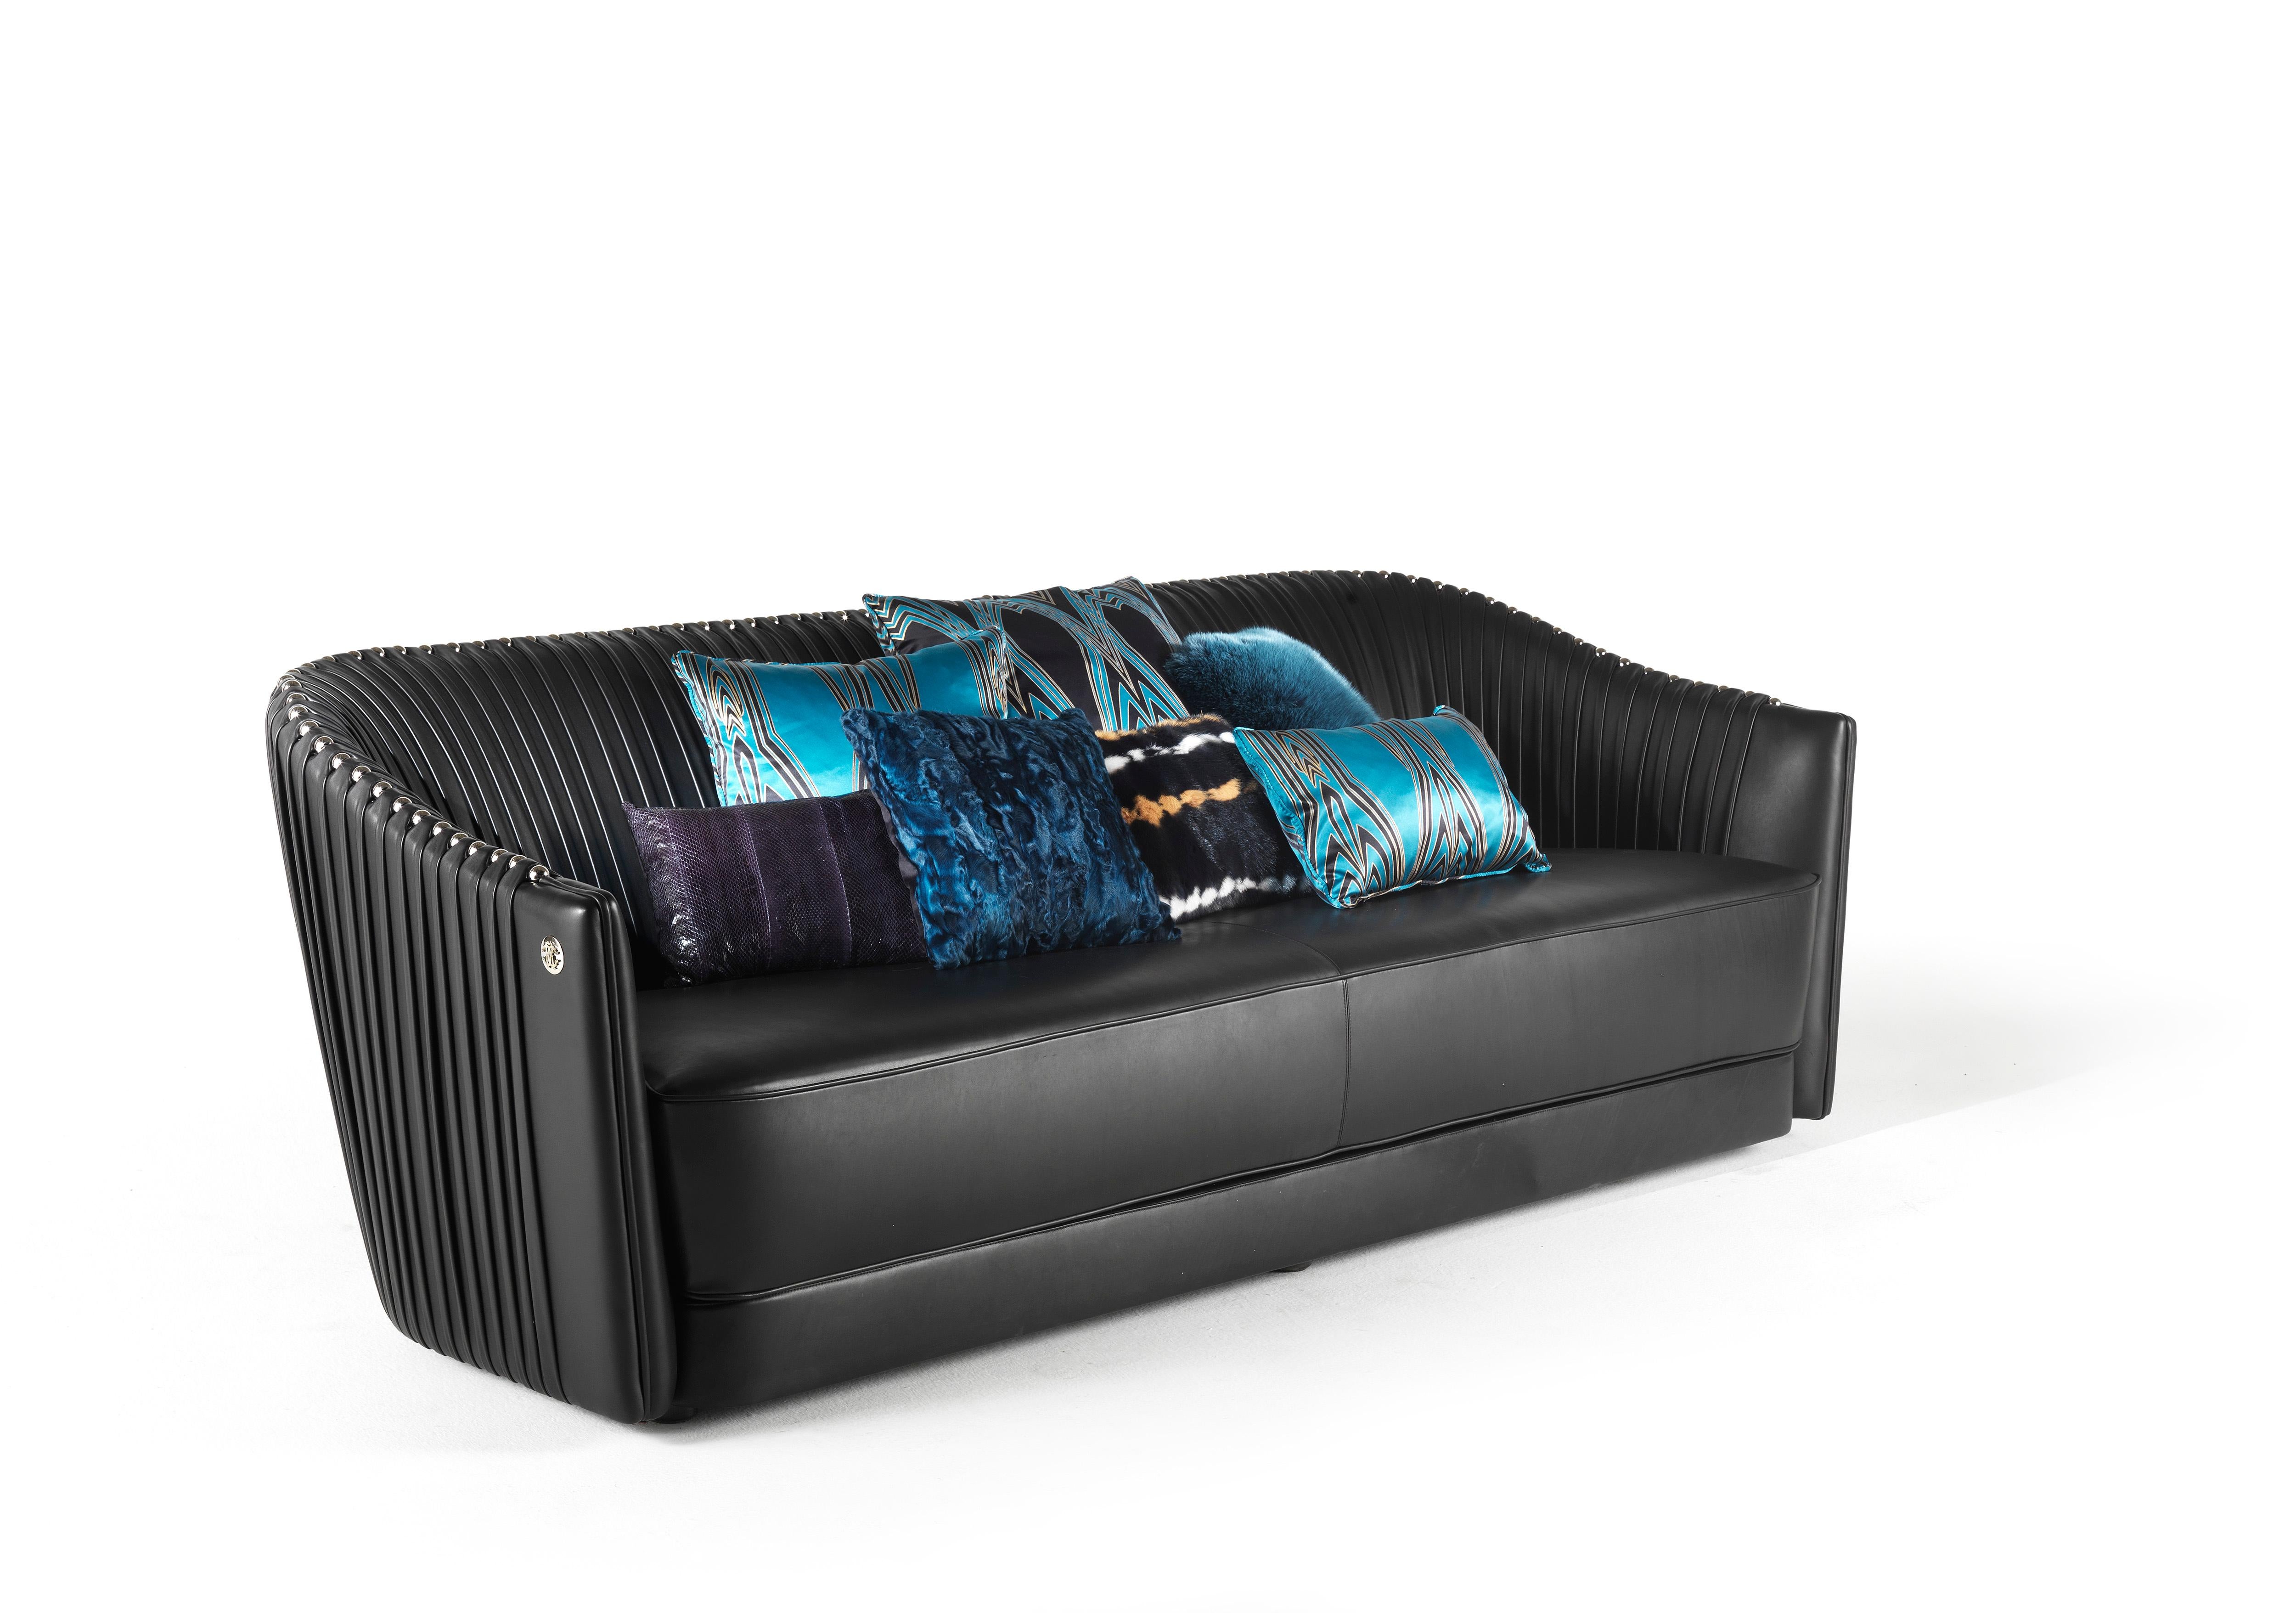 The refined manufacturing of the seatback, enriched with decorative studs, is the main feature of the Sharpei sofa, an iconic piece of furniture that combines sartorial manufacturing with sophisticated decoration.
Sharpei 3-seater sofa structure in